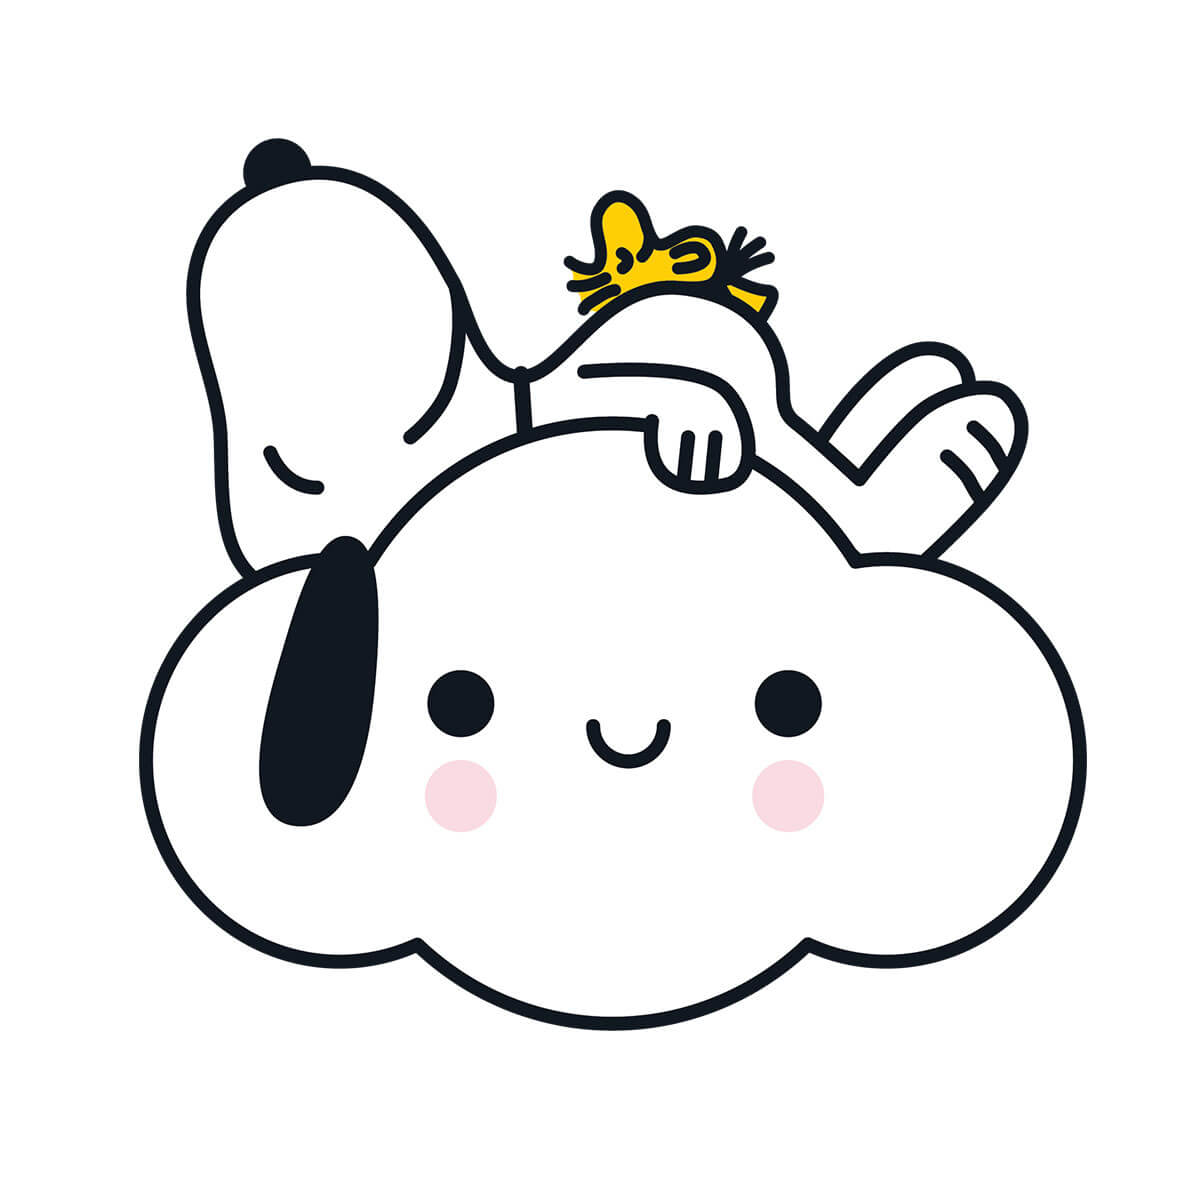 A cloud with a face and a white dog sleeping on it.